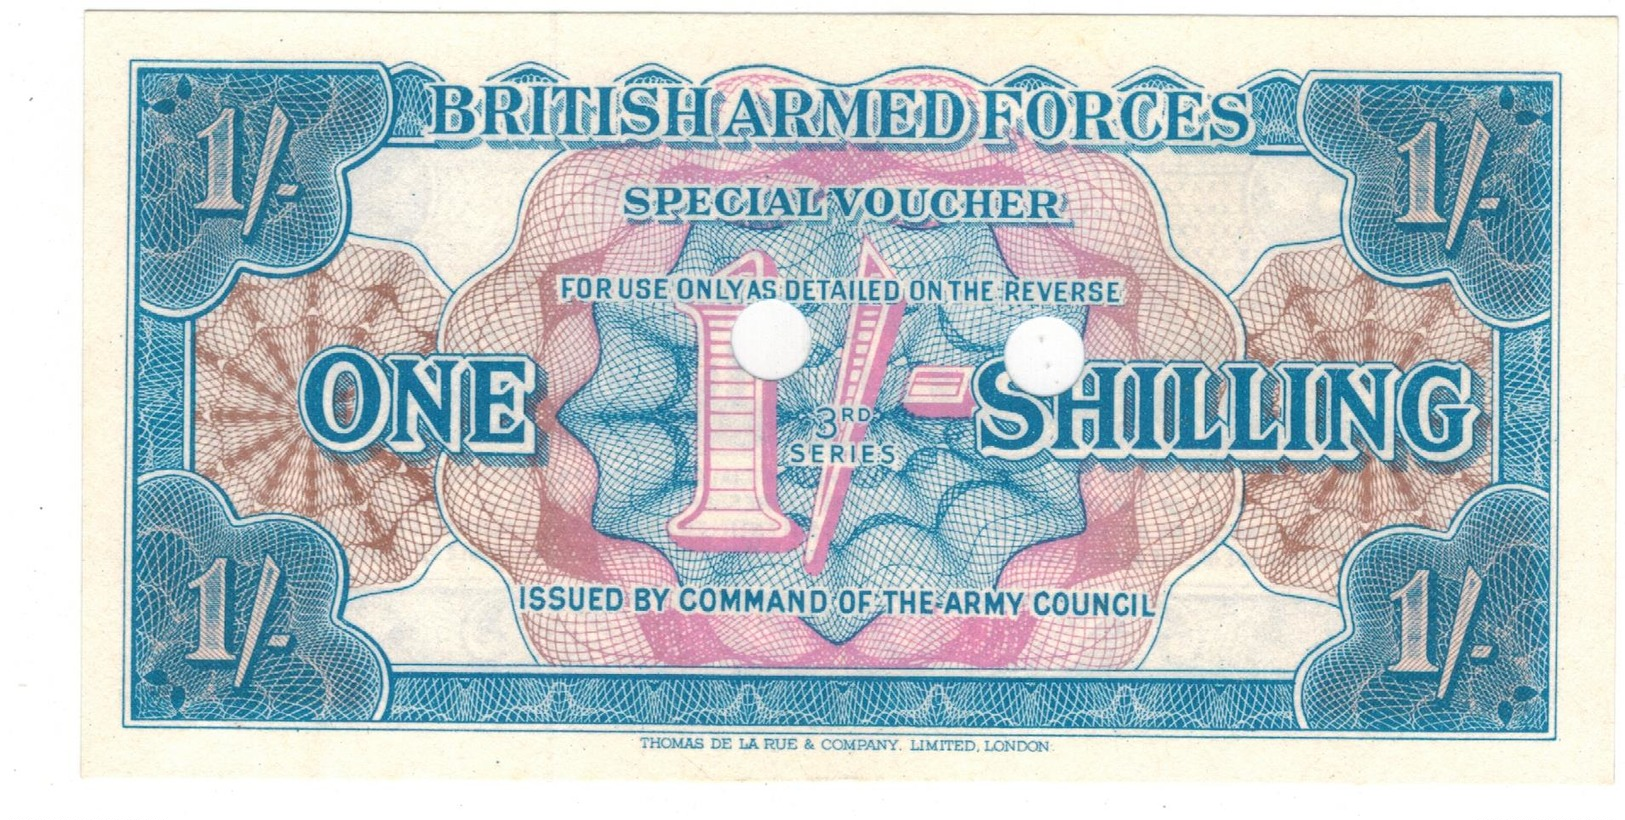 British Armed Forces, 1 Shill. 3rd SERIES, UNC. - British Armed Forces & Special Vouchers